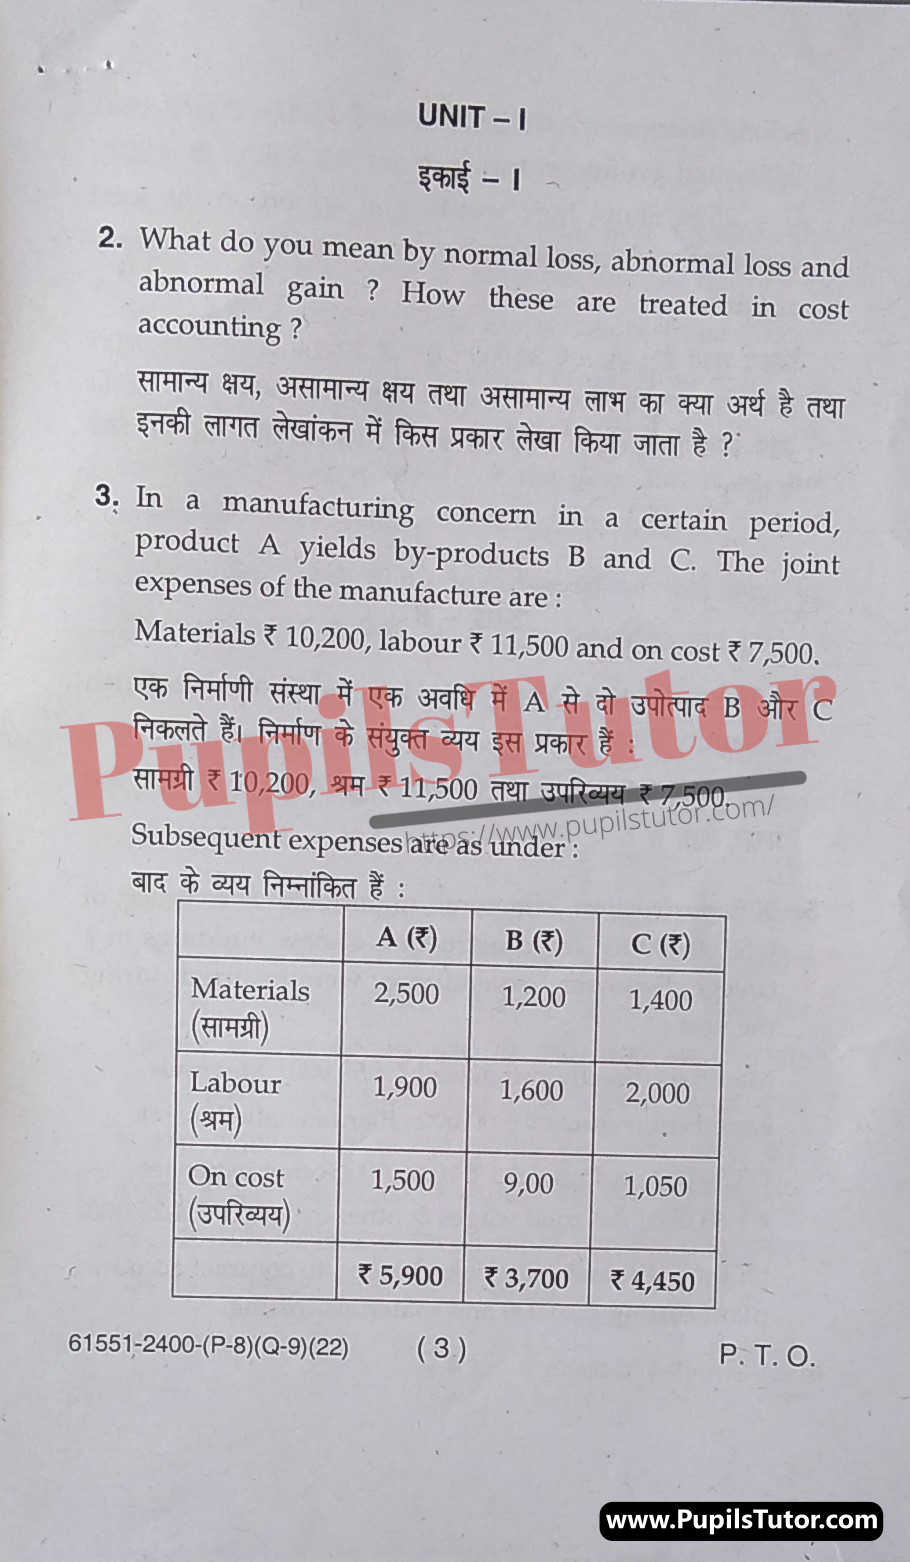 Free Download PDF Of M.D. University B.Com. Sixth Semester Latest Question Paper For Cost Accounting Subject (Page 3) - https://www.pupilstutor.com